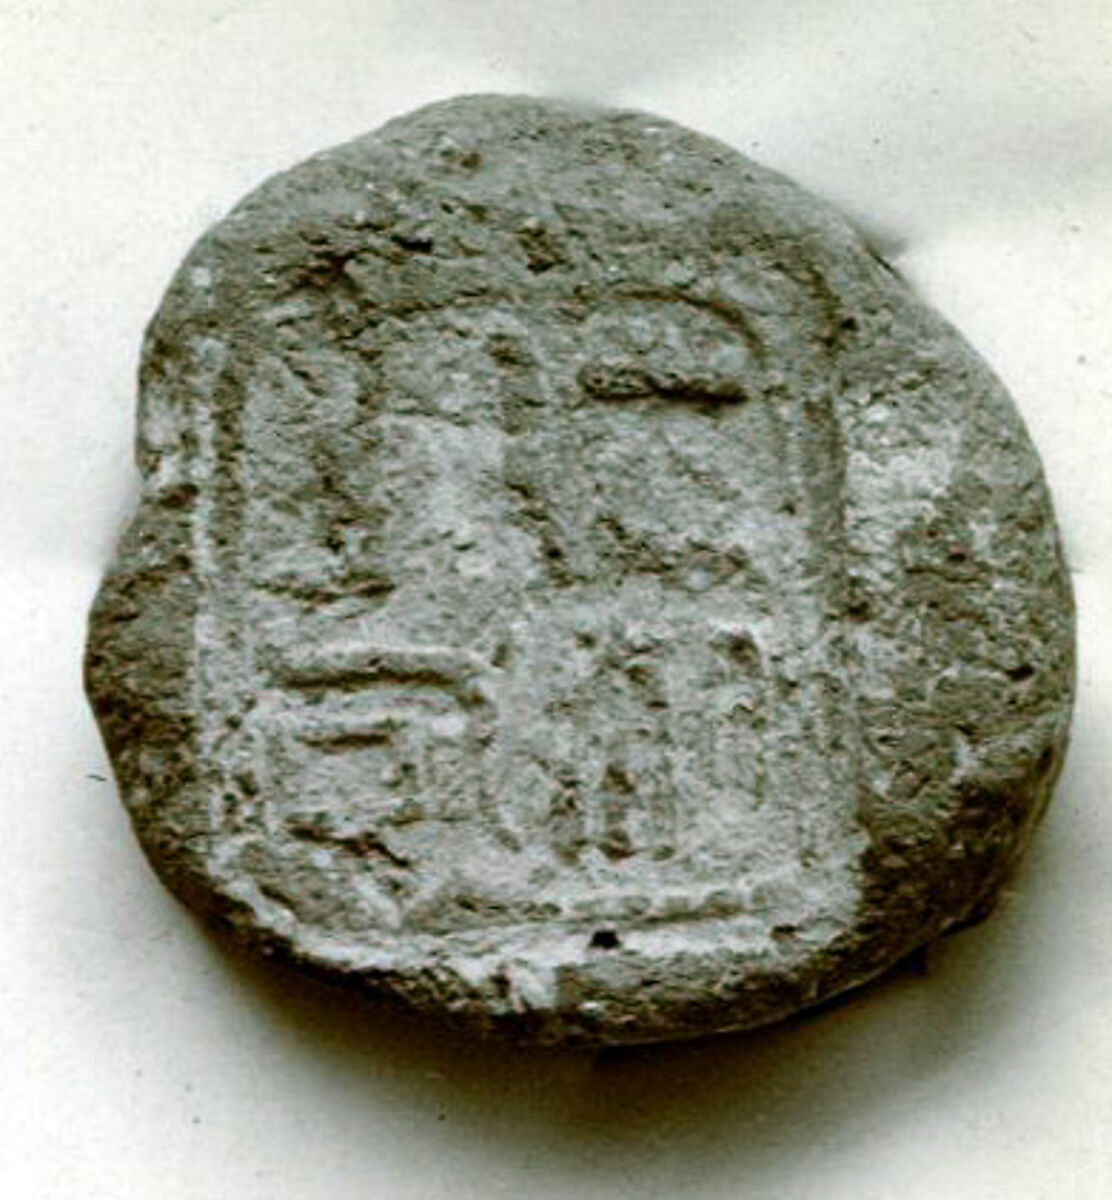 Funerary Cone of the Scribe Amenmose, Pottery 